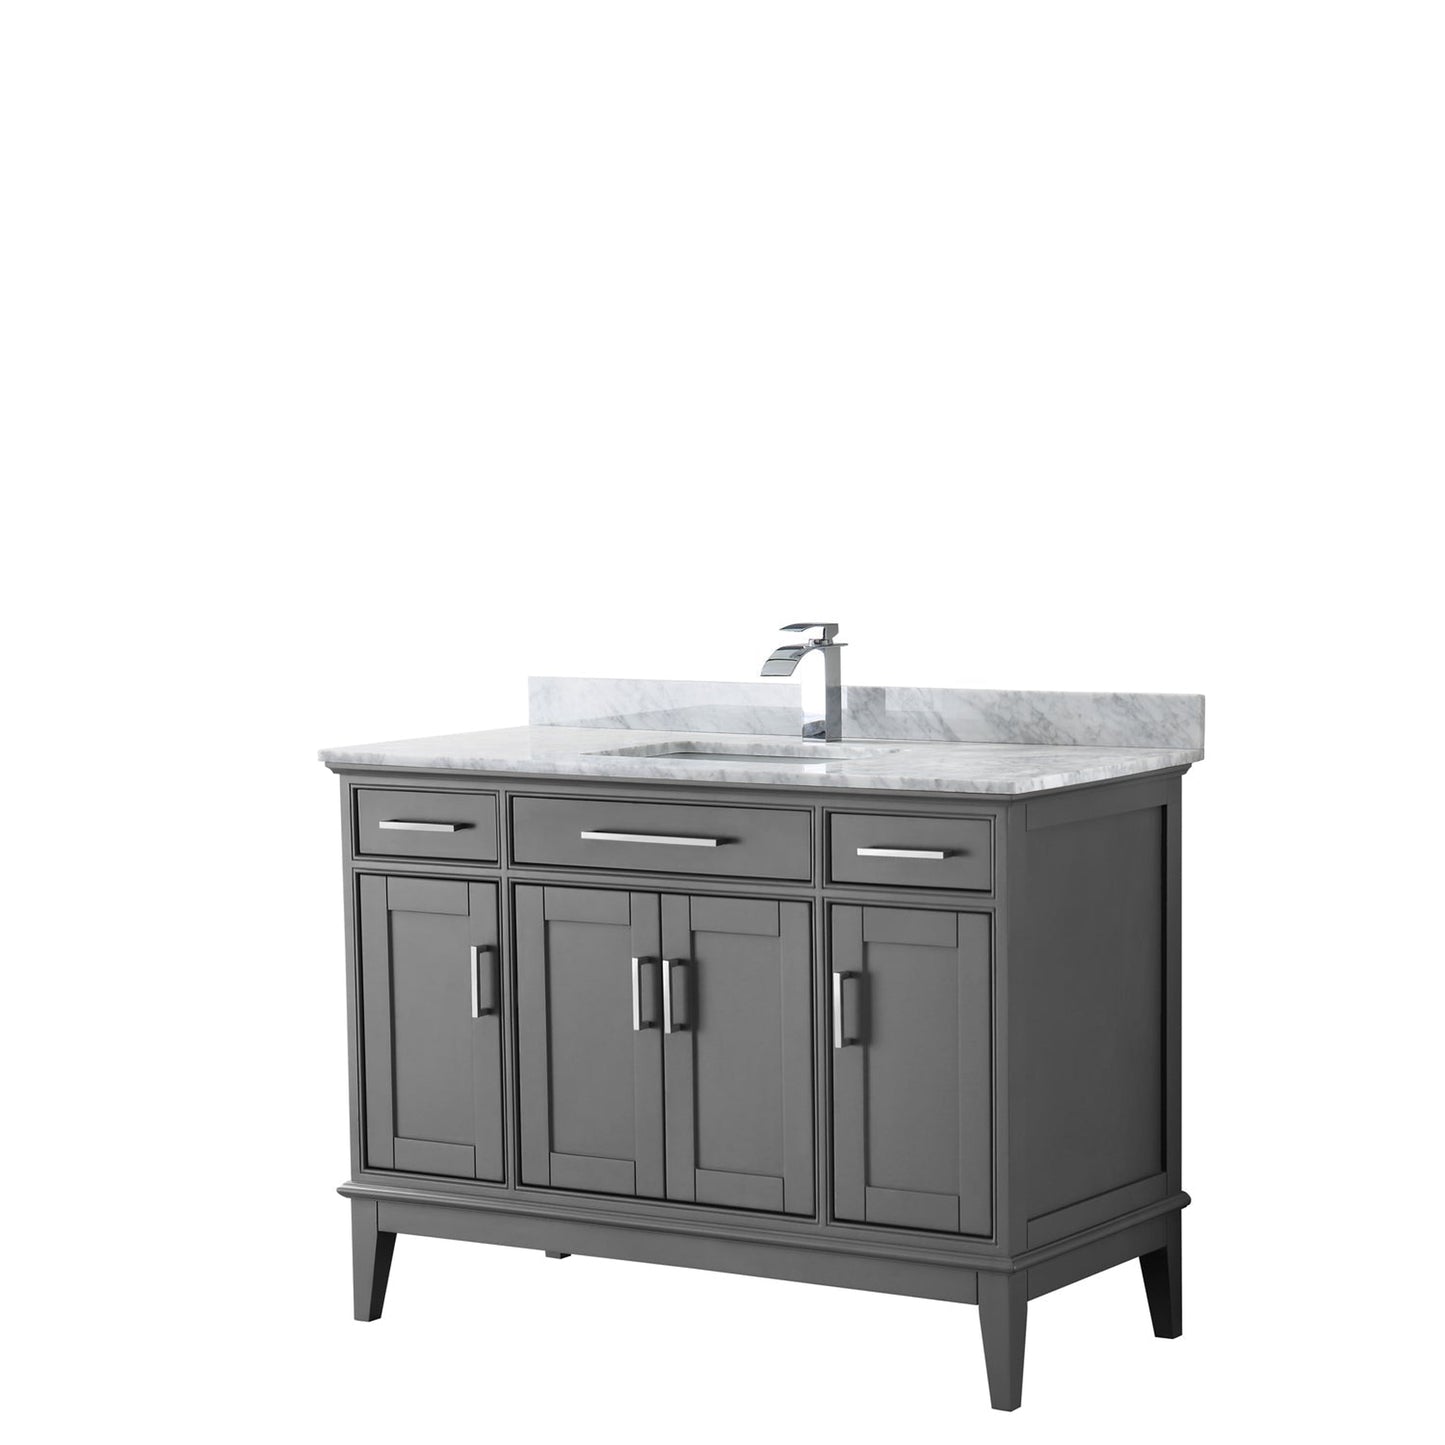 Wyndham Collection Margate 48" Single Bathroom Dark Gray Vanity With White Carrara Marble Countertop And Undermount Square Sink